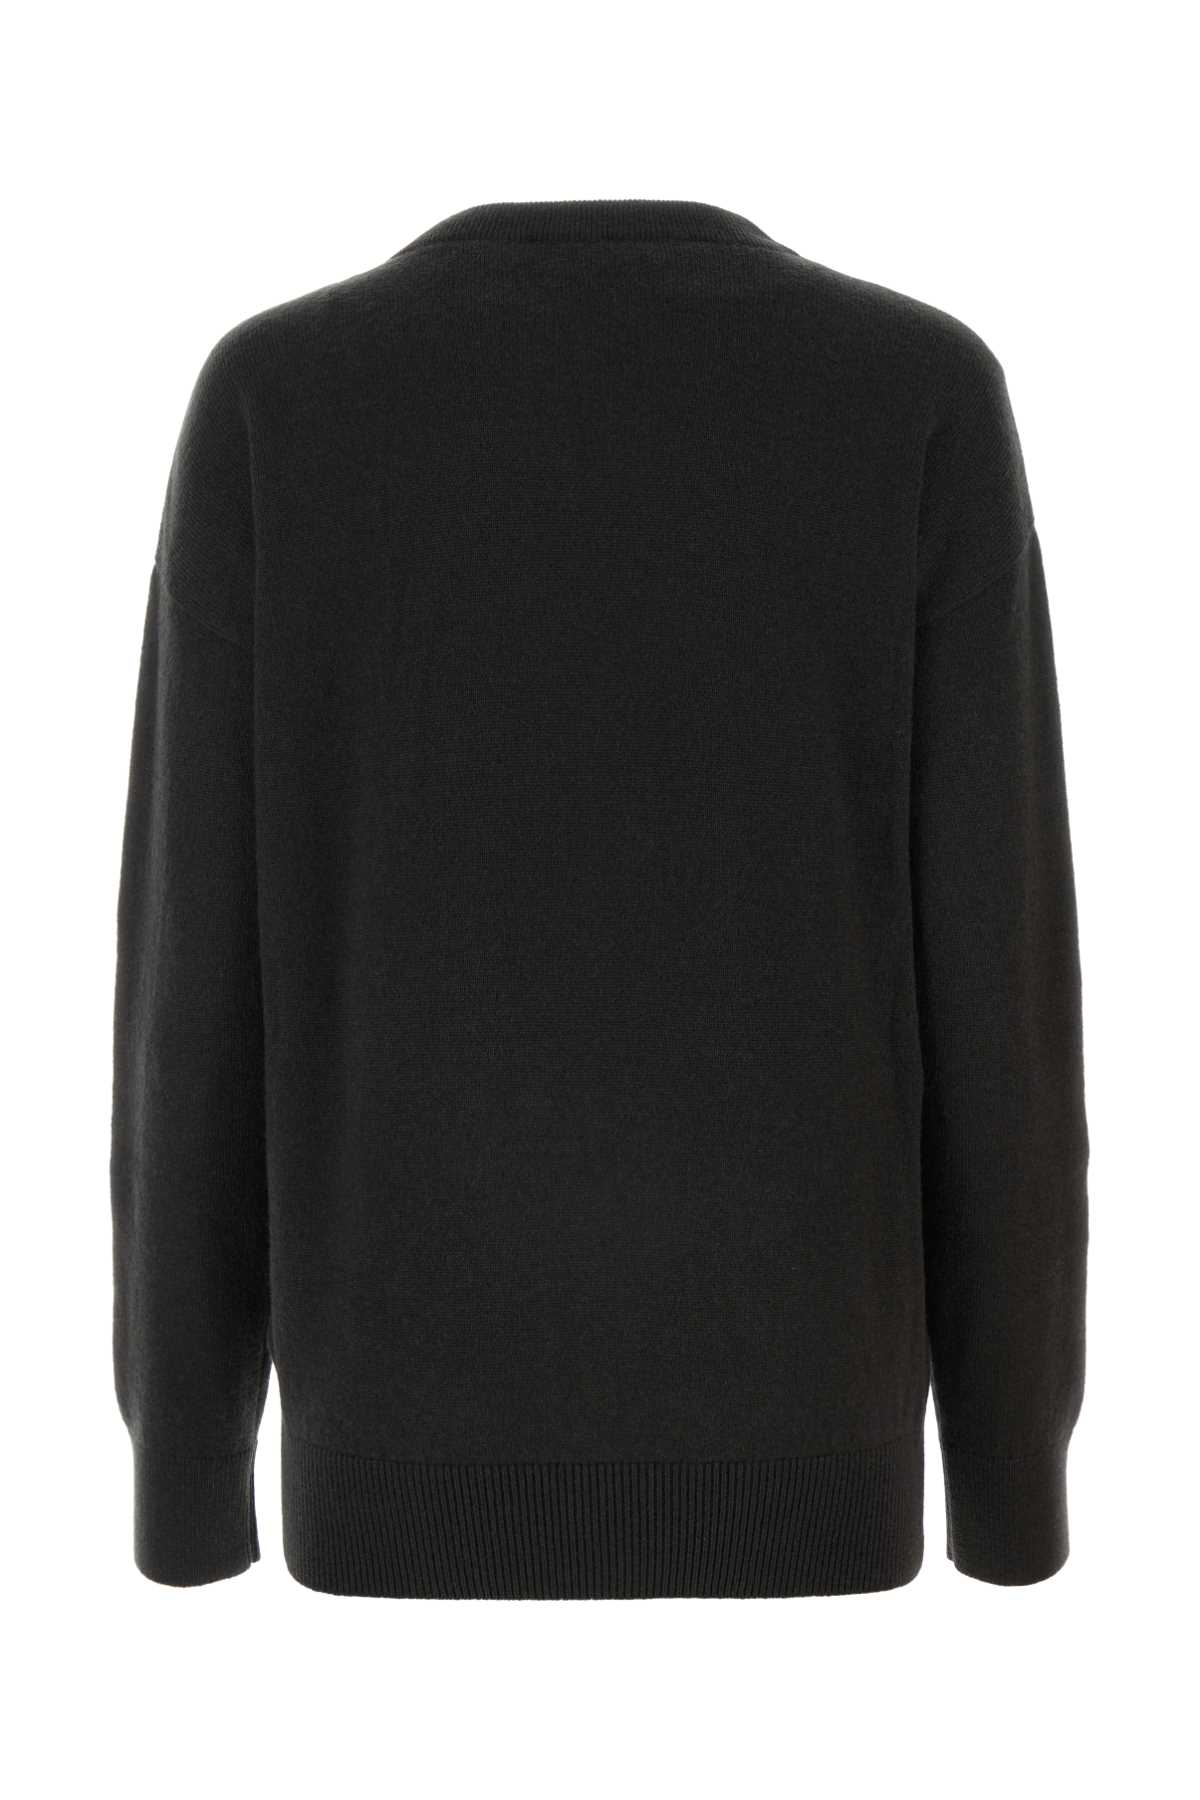 Burberry Anthracite Cashmere Sweater In Onyx